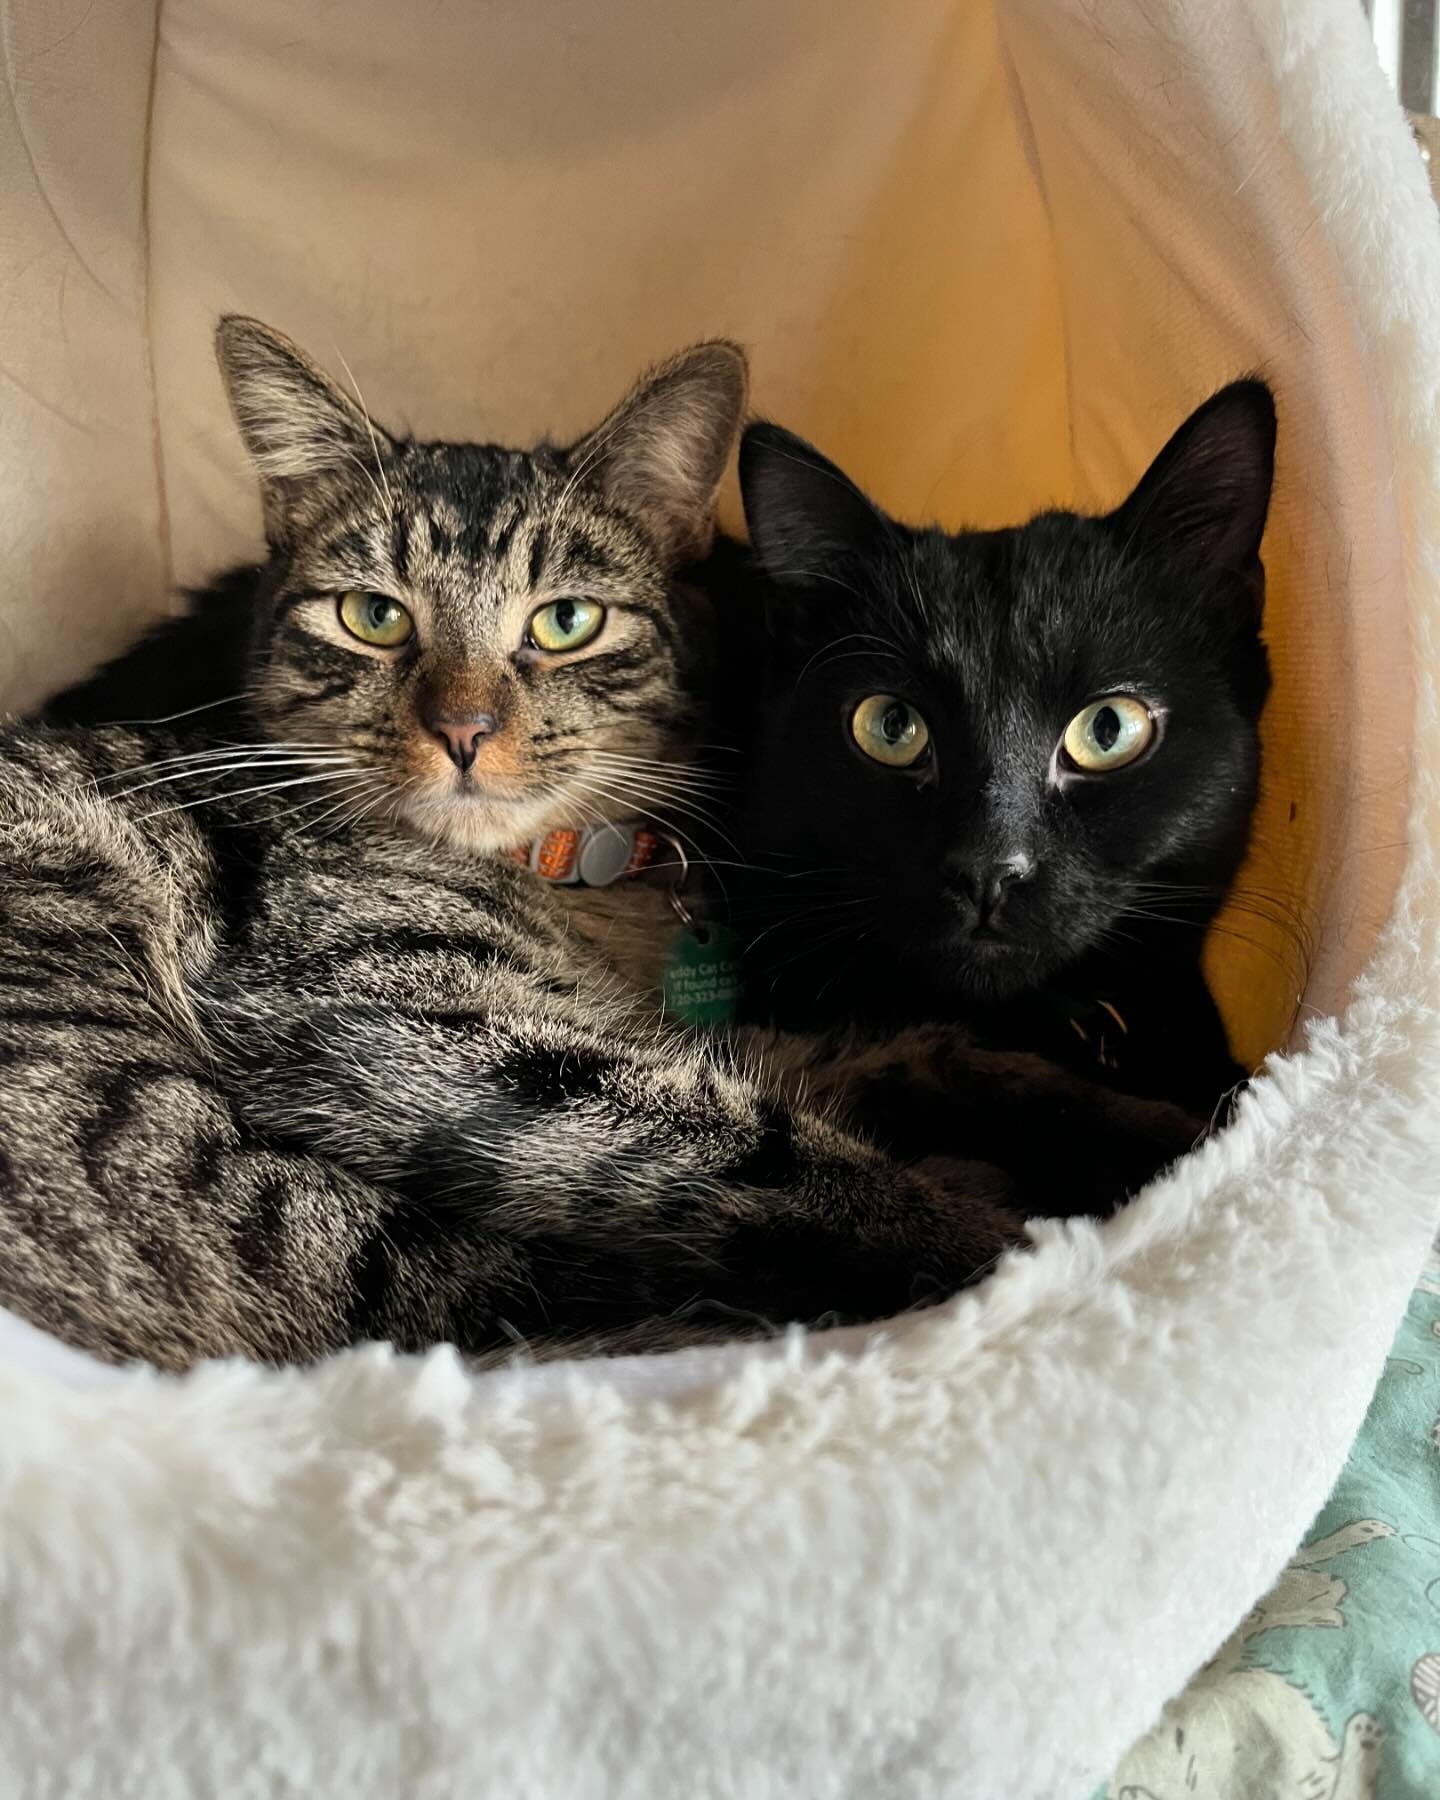 Pokey and Midnight got adopted! We&rsquo;re not sure if we&rsquo;ve ever had a more bonded pair. ❤️❤️ They would snuggle every moment they could morning, noon, or night. The friendliest kitties to all cats and staff. We adore them! They join a loving